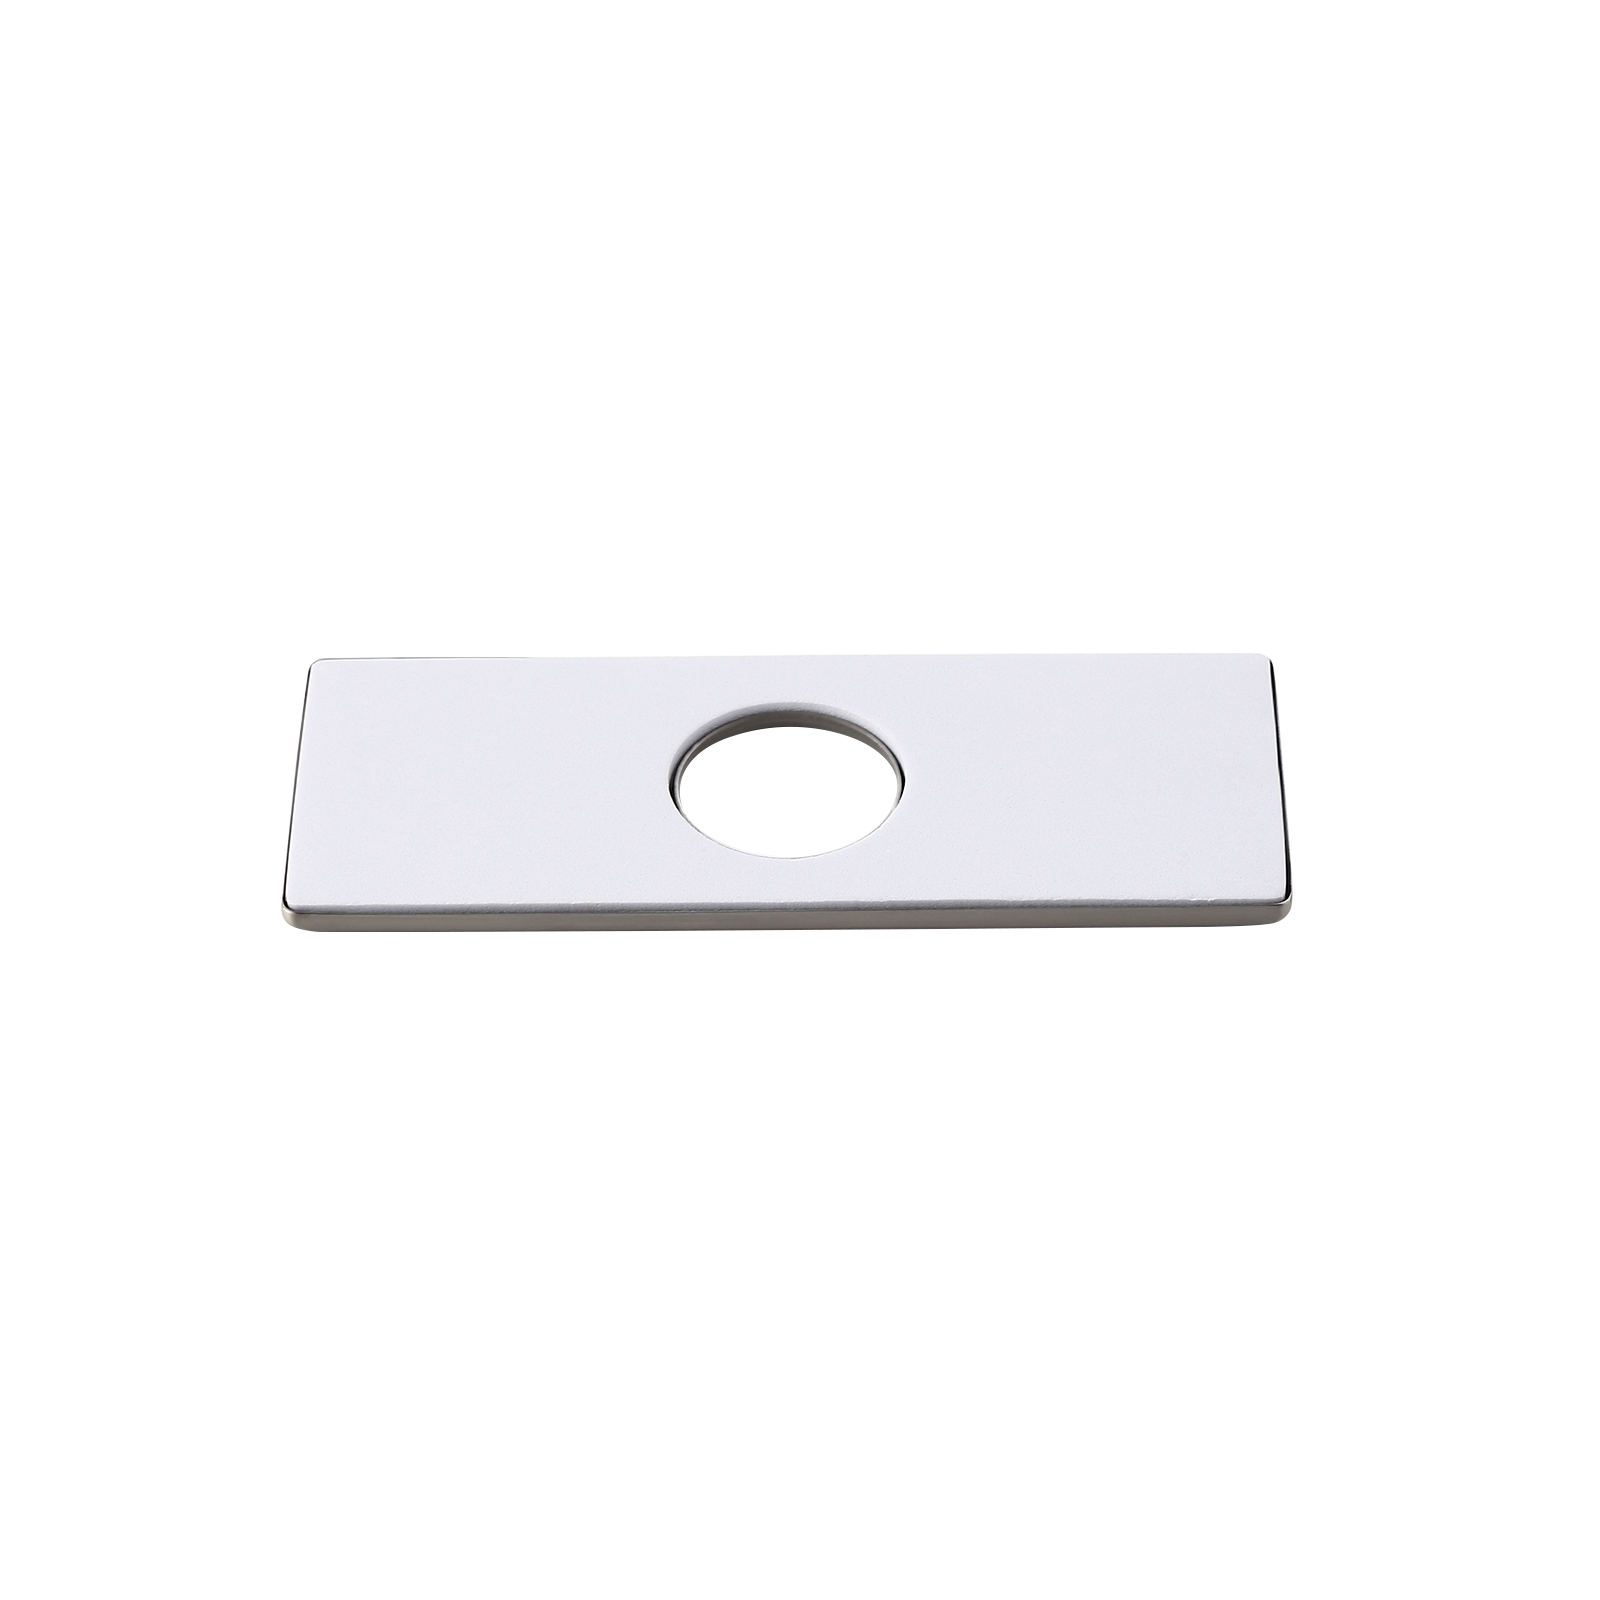 Square Escutcheon Plate Bathroom Vanity Basin Tap Hole Cover Deck Plate Brushed Nickel